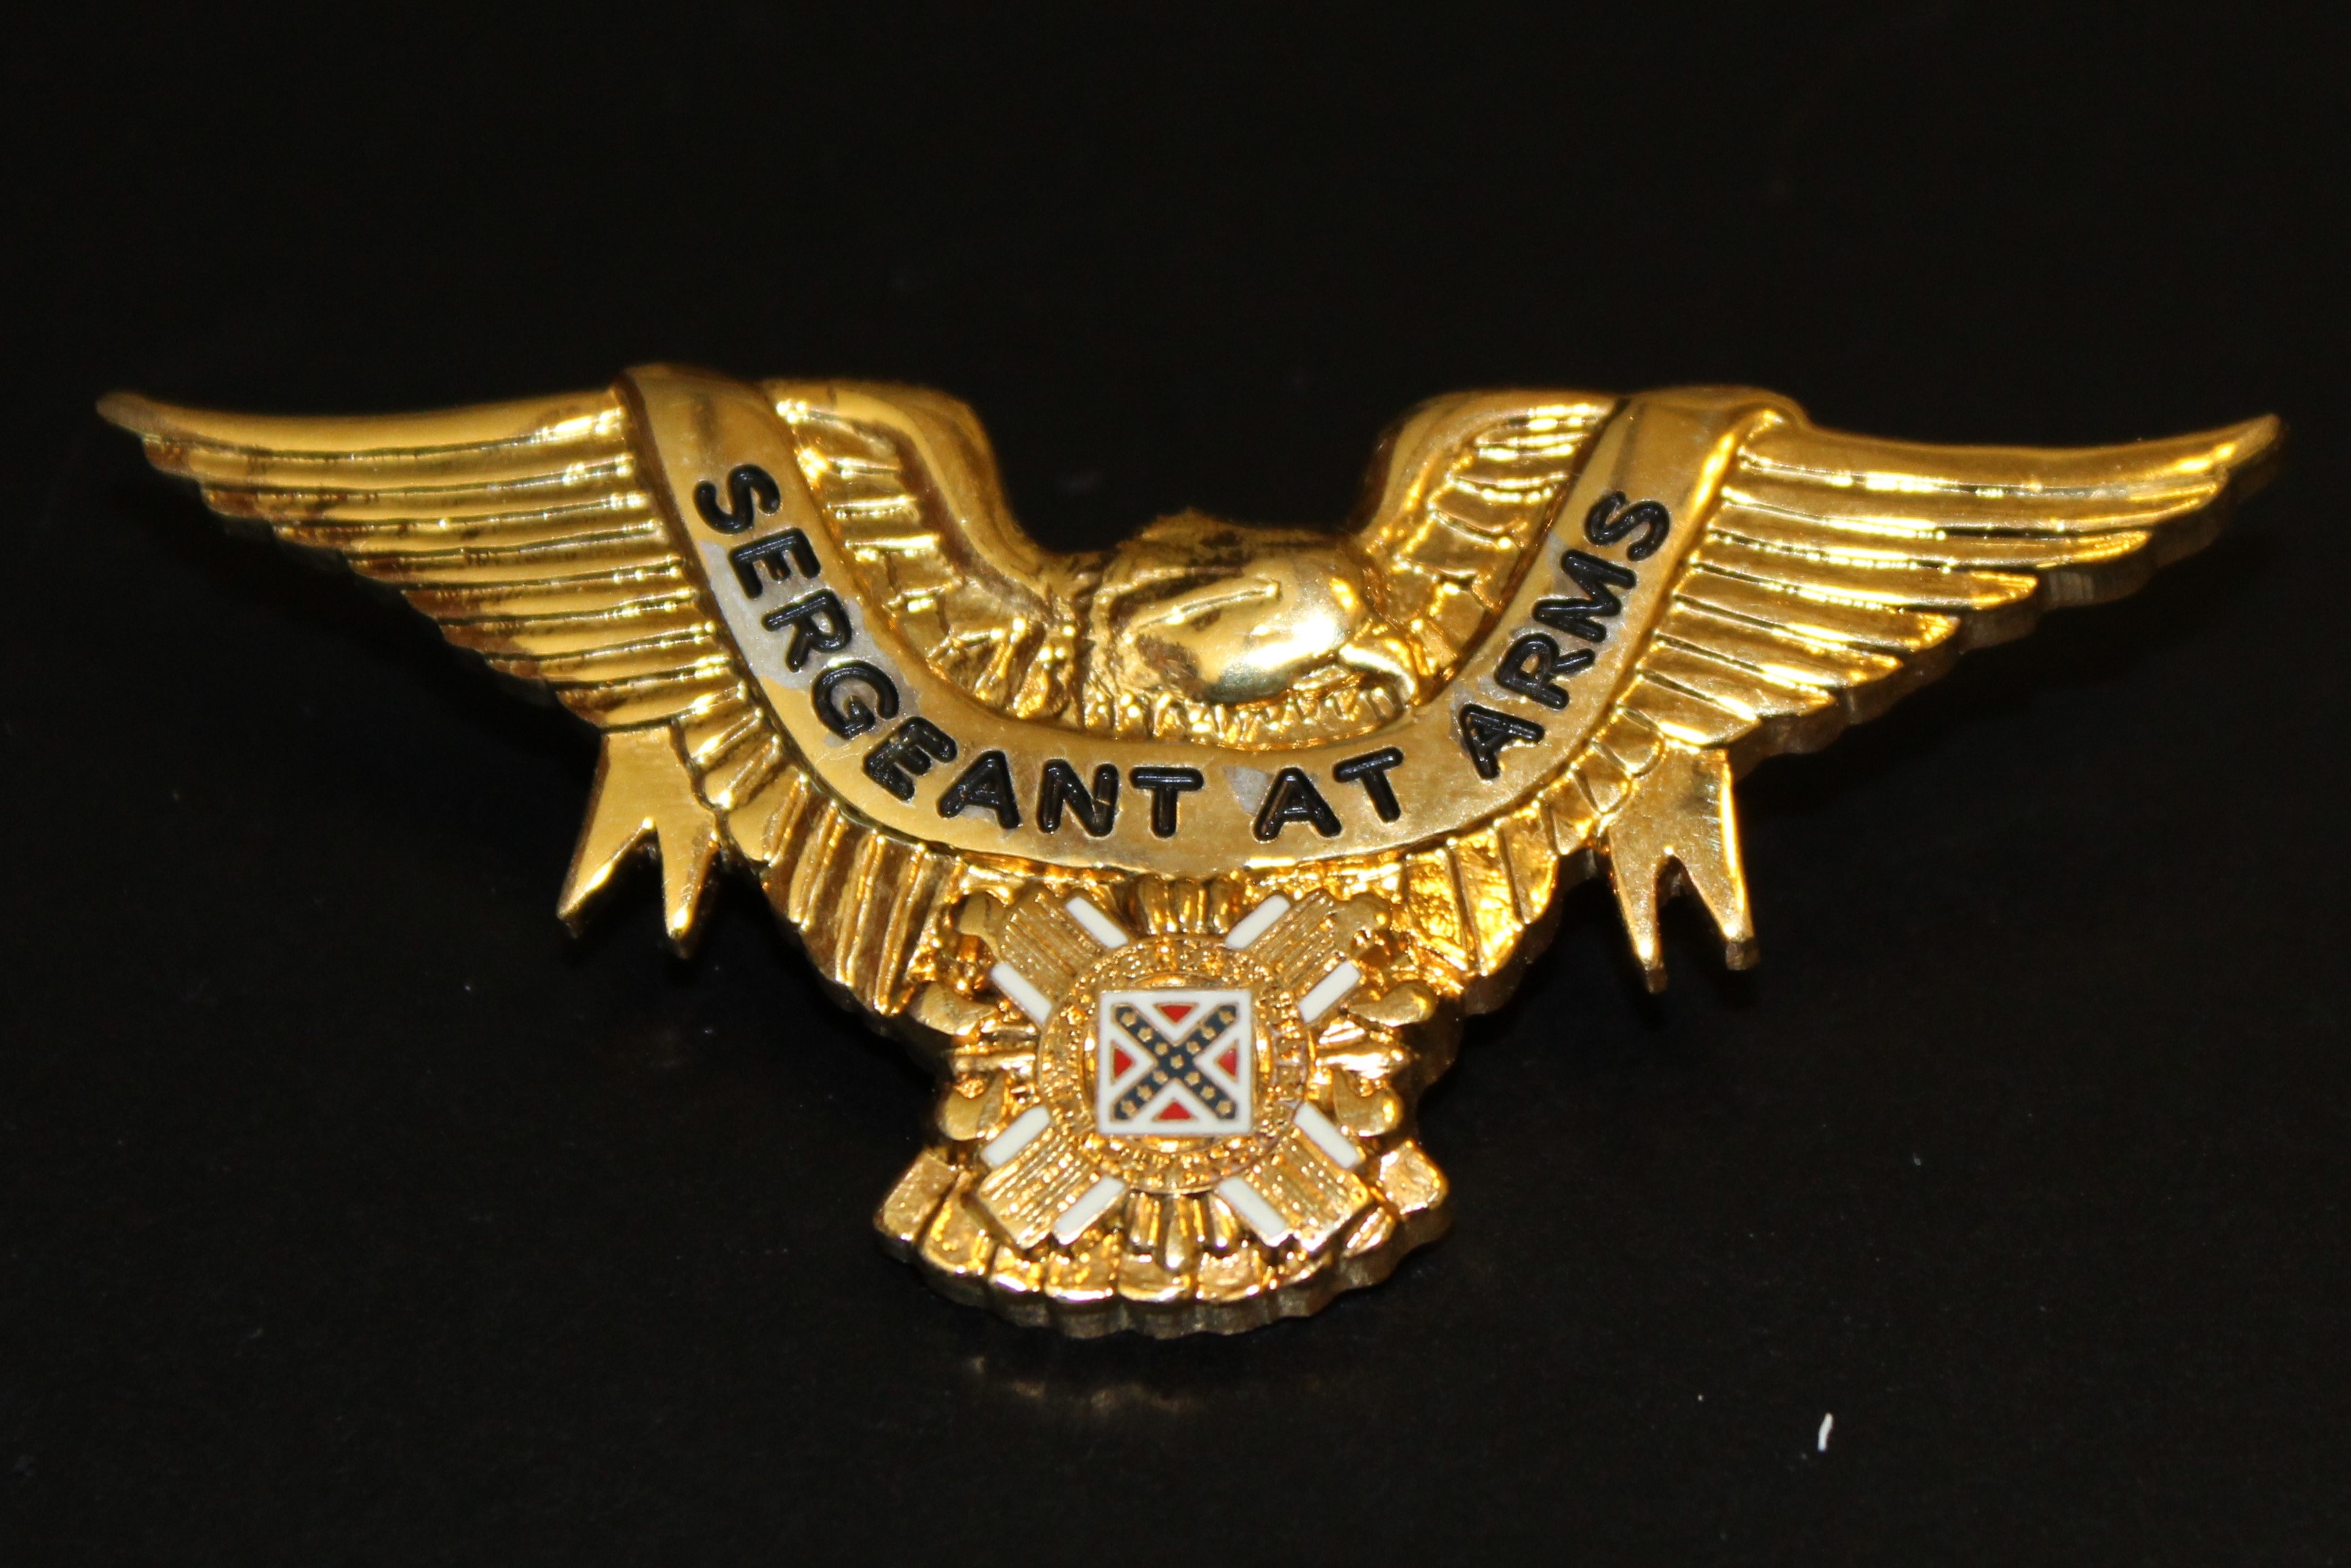 Eagle, Sergeant-At-Arms